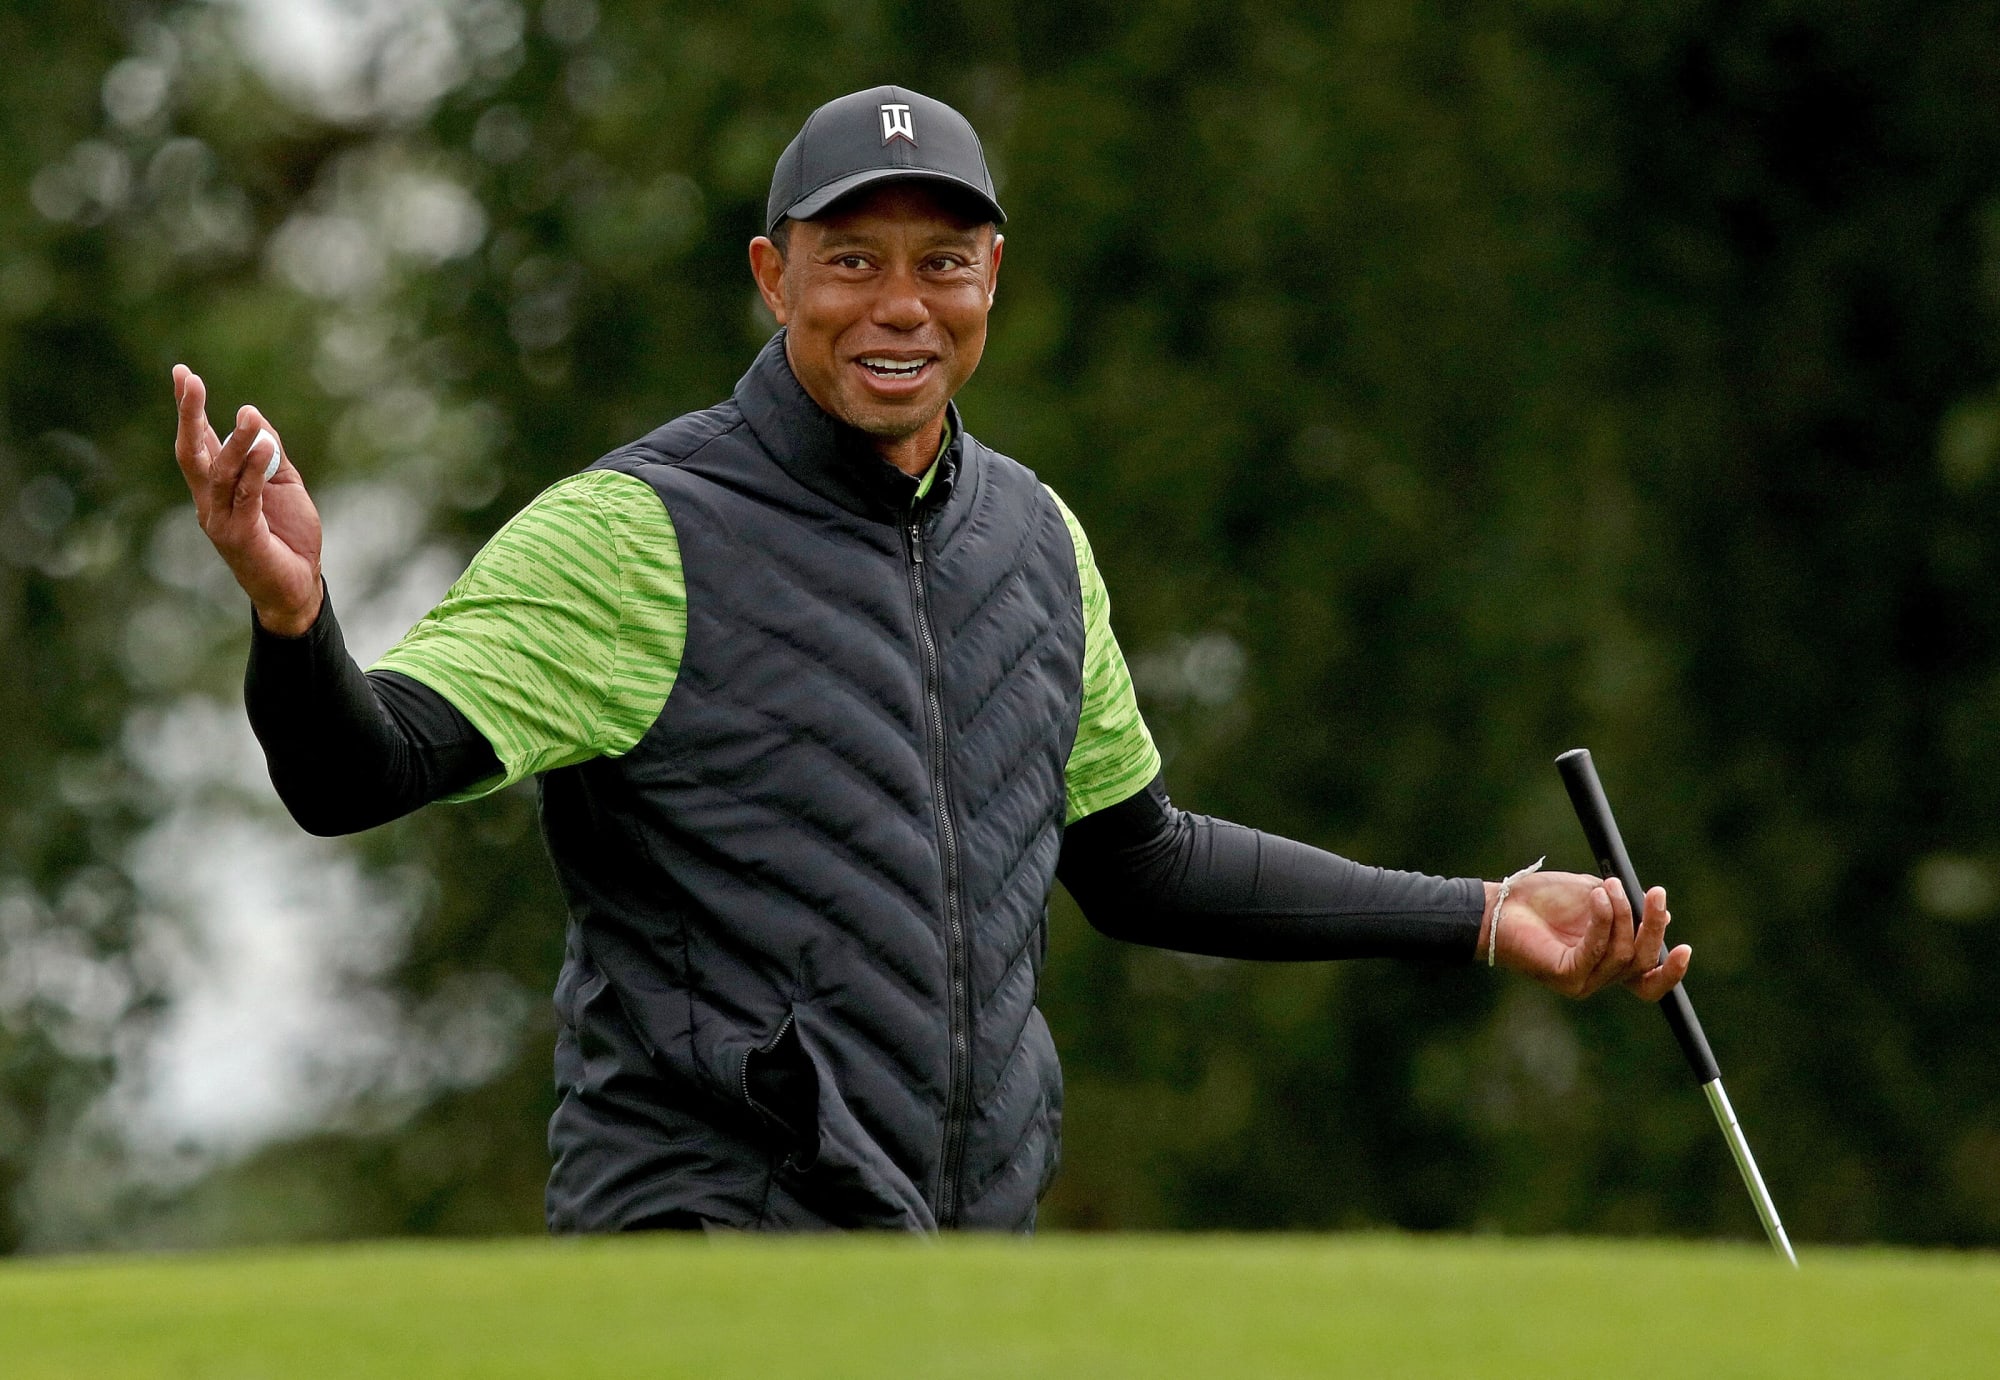 Watch Tiger Woods chip in for eagle in Open Championship tune-up